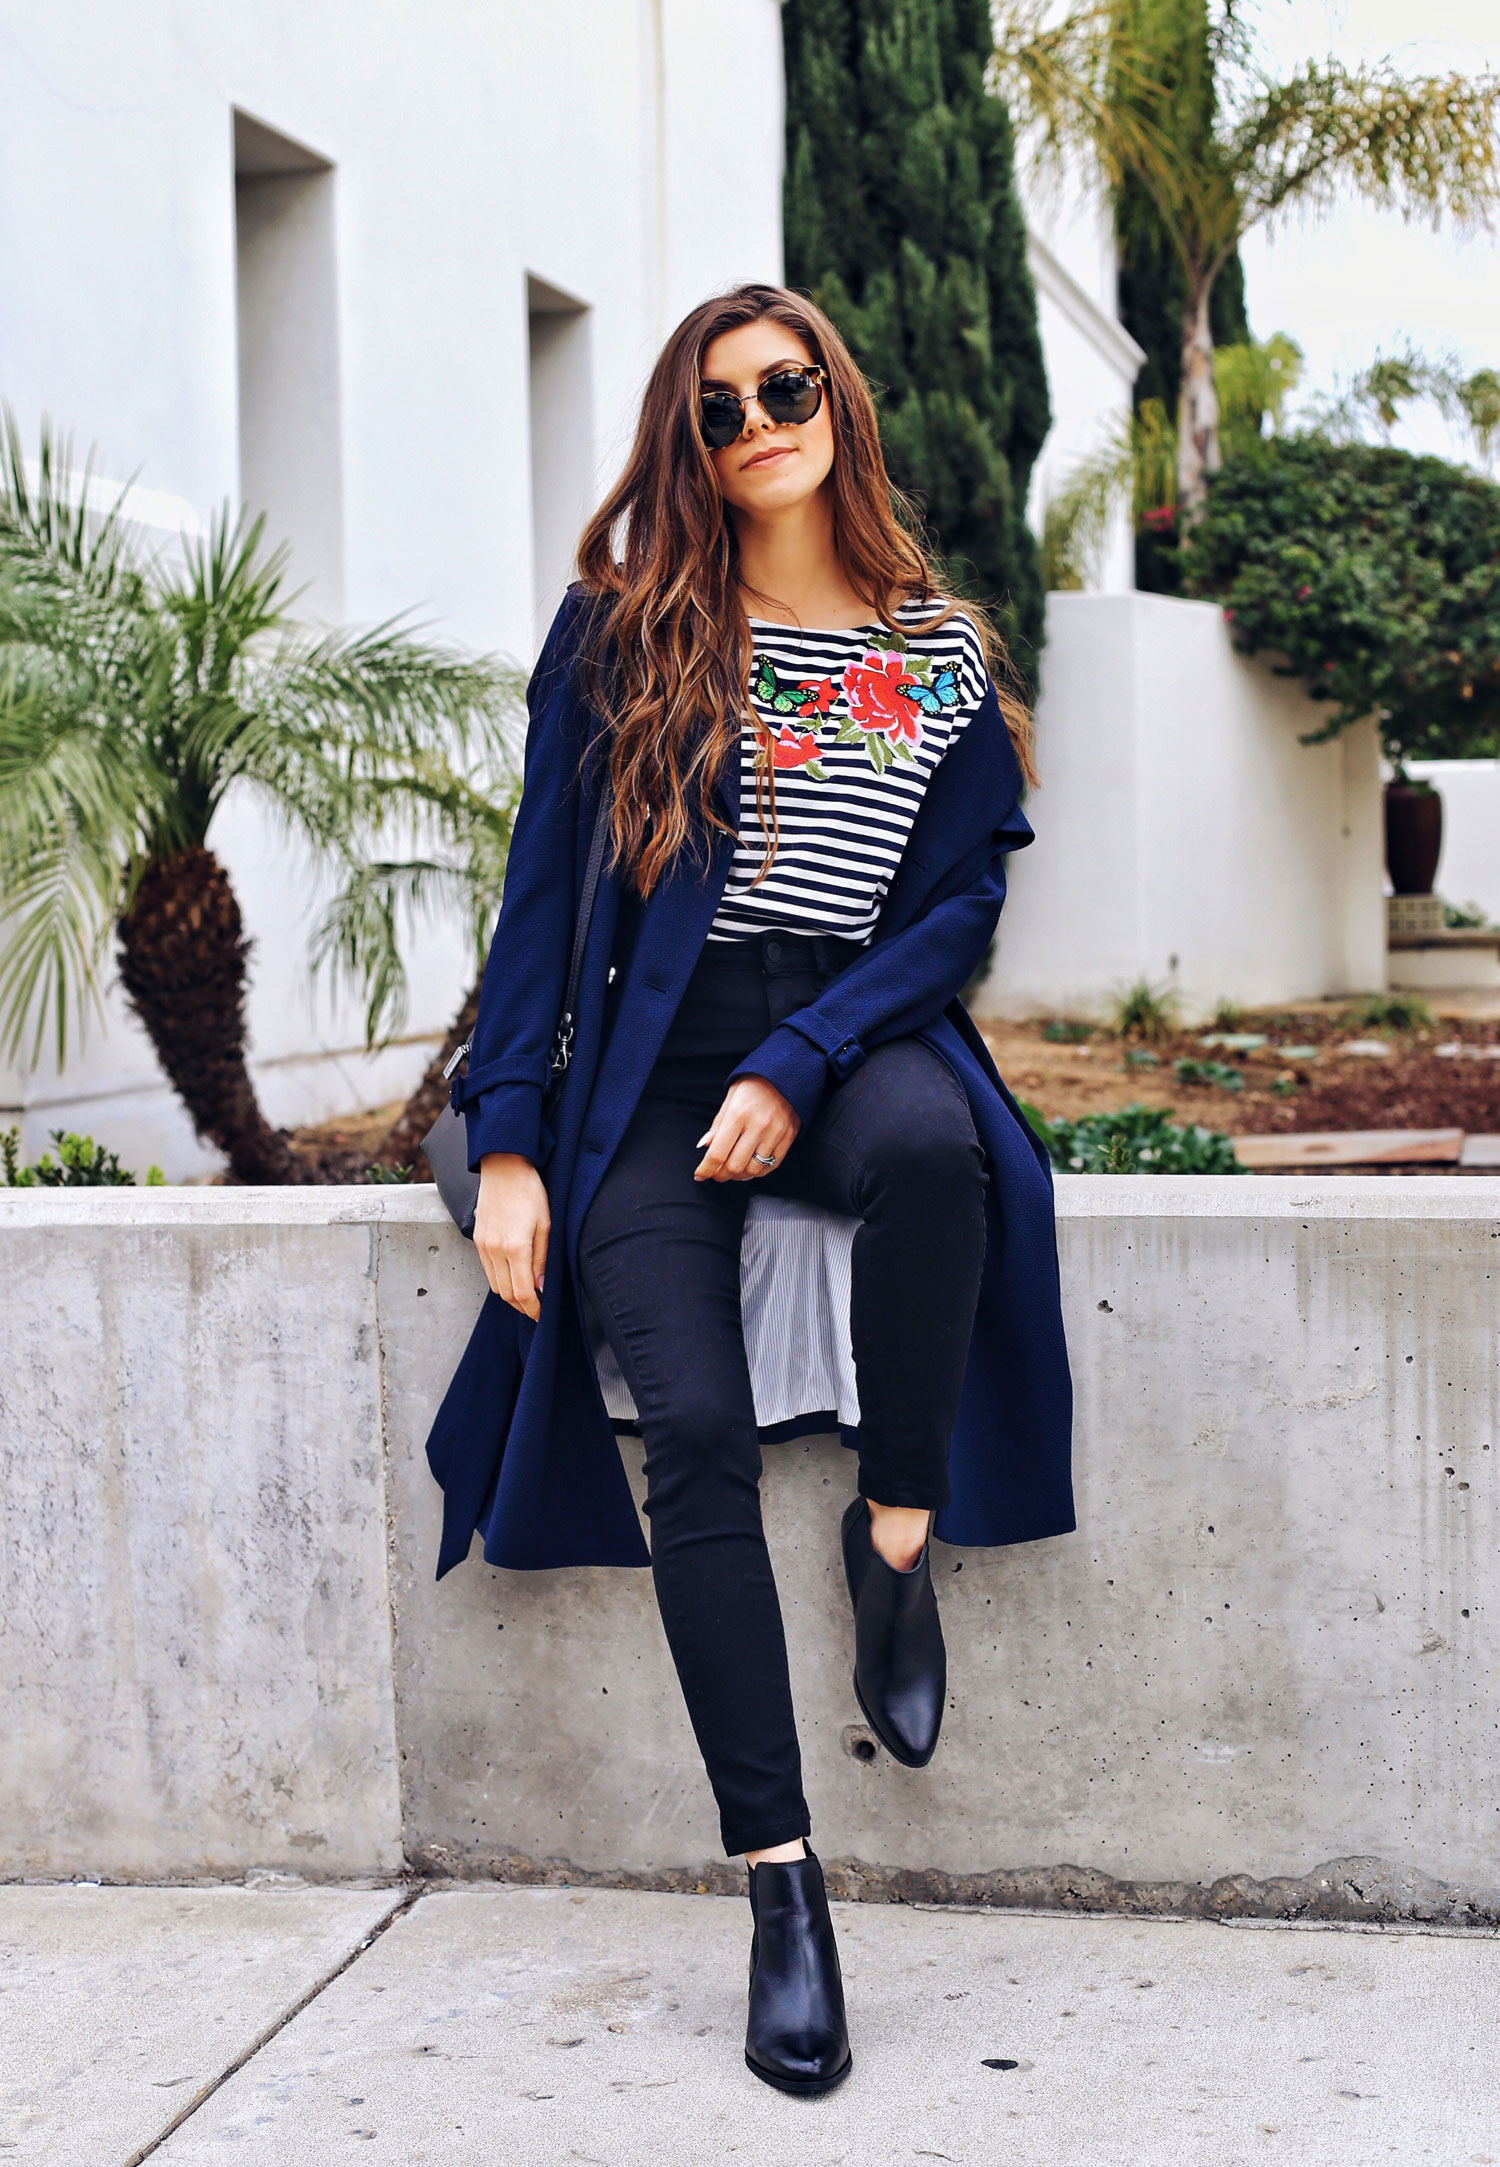 Fashion and lifestyle blogger Adelina Perrin of The Charming Olive wearing Marks & Spencer Coat, Striped Shirt, leather black boots and black jeans